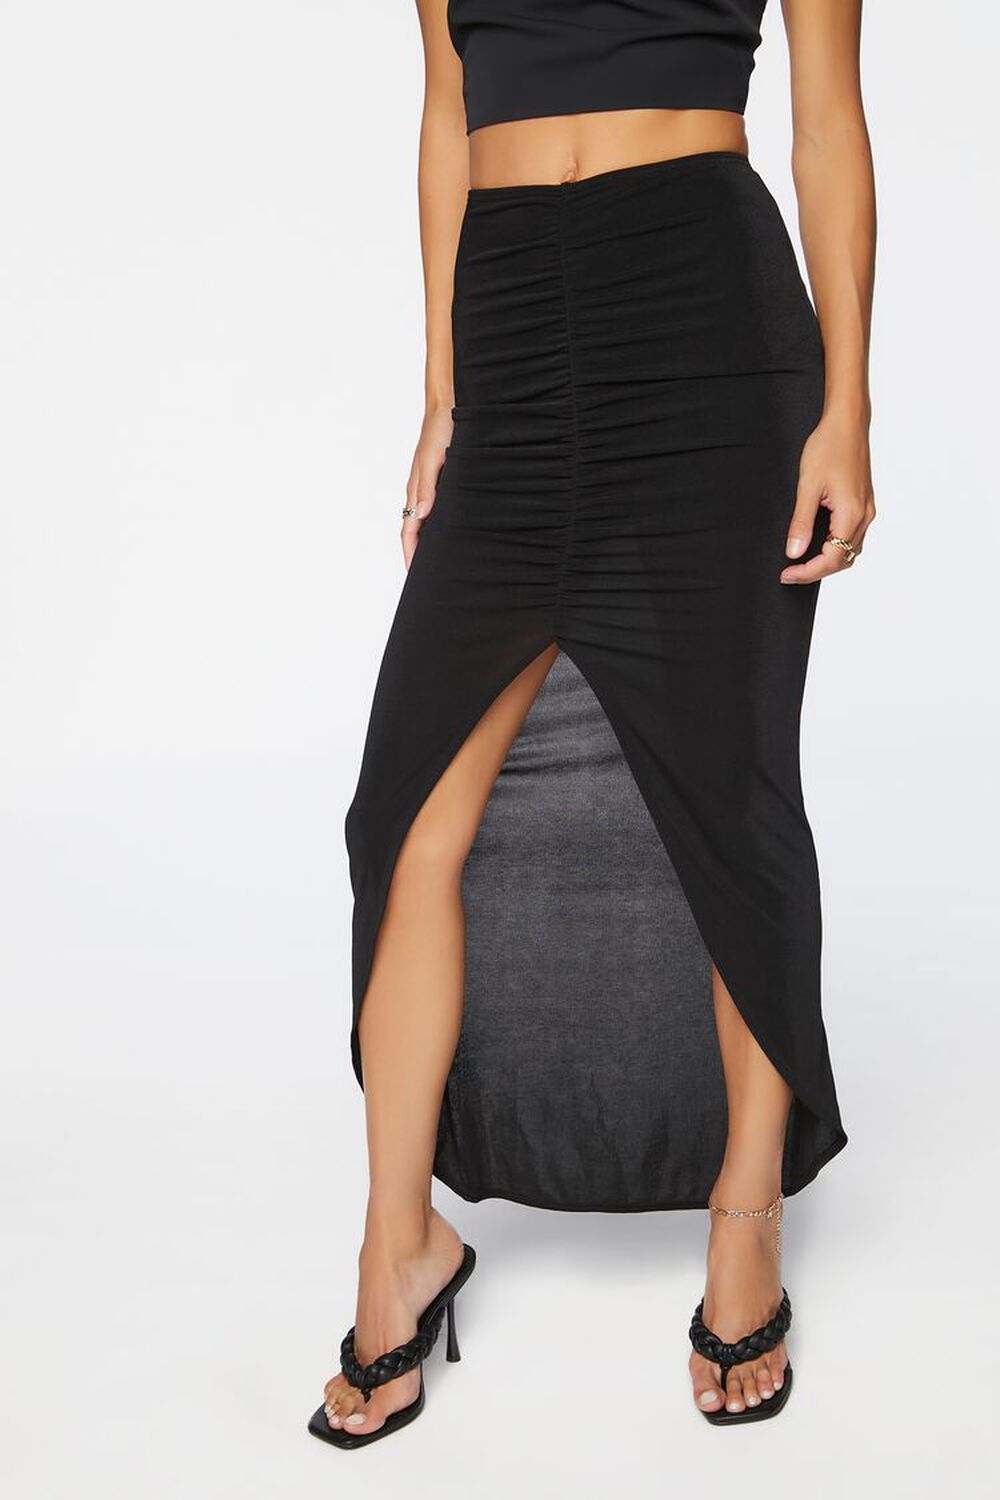 BLACK Ruched High-Low Skirt, image 2